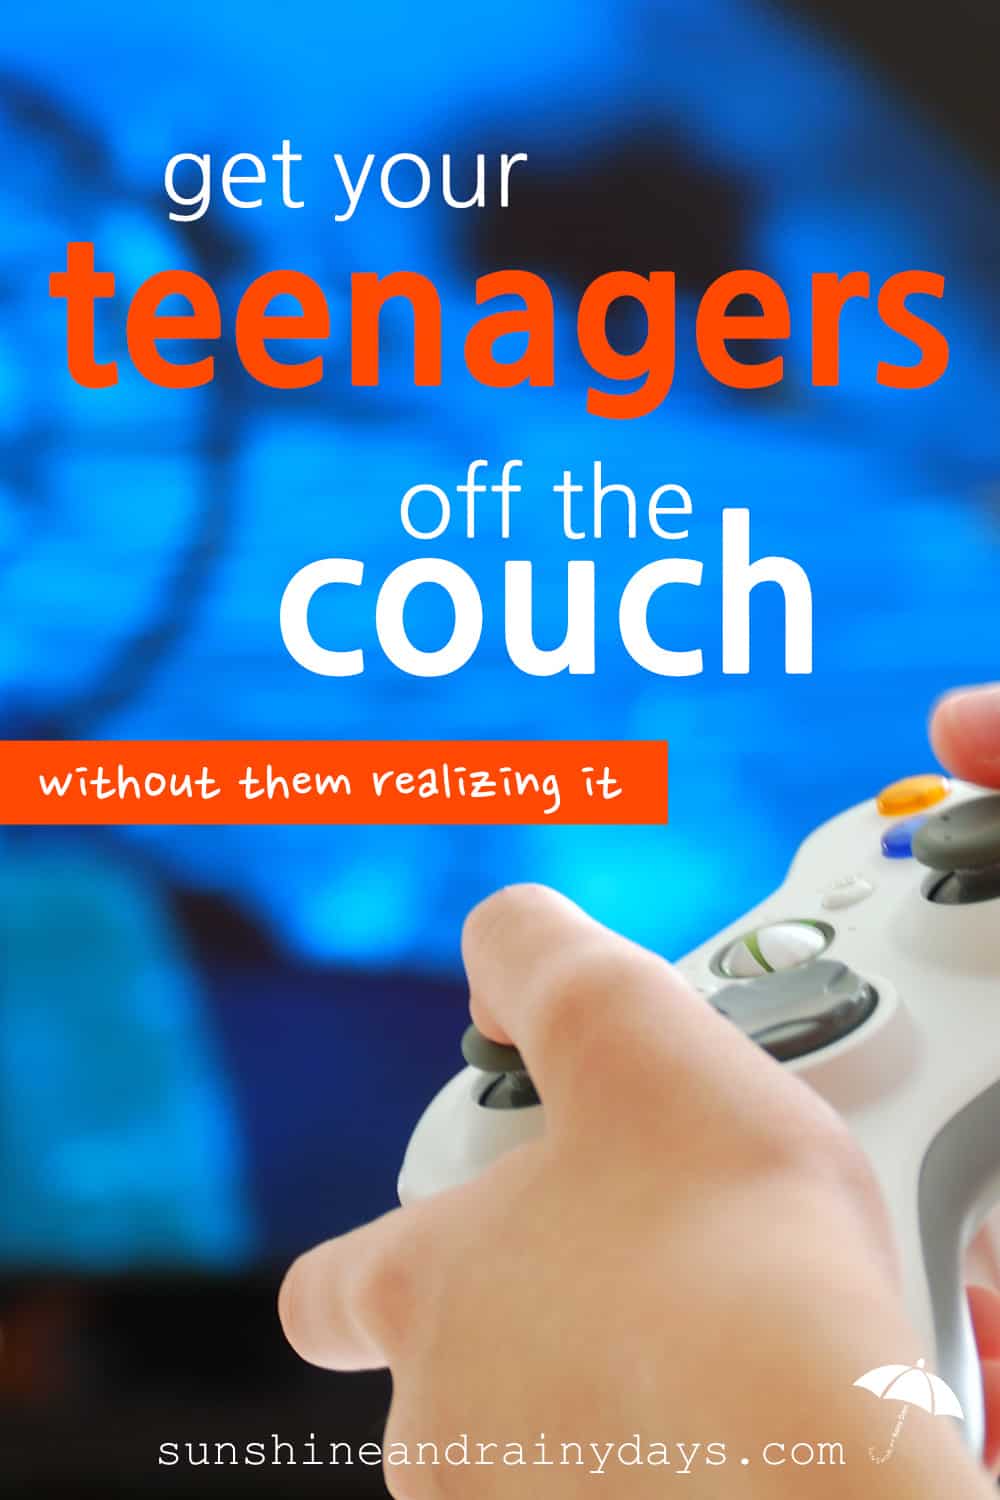 Are your teenagers whittling their time away on the couch while staring at their electronic devices? Has their favorite spot on the couch become so well used that you sink to oblivion when sitting in their spot? The trick is to find activities to get your teenagers off the couch without it being a chore, for them or you. #teens #teenagers #SARD